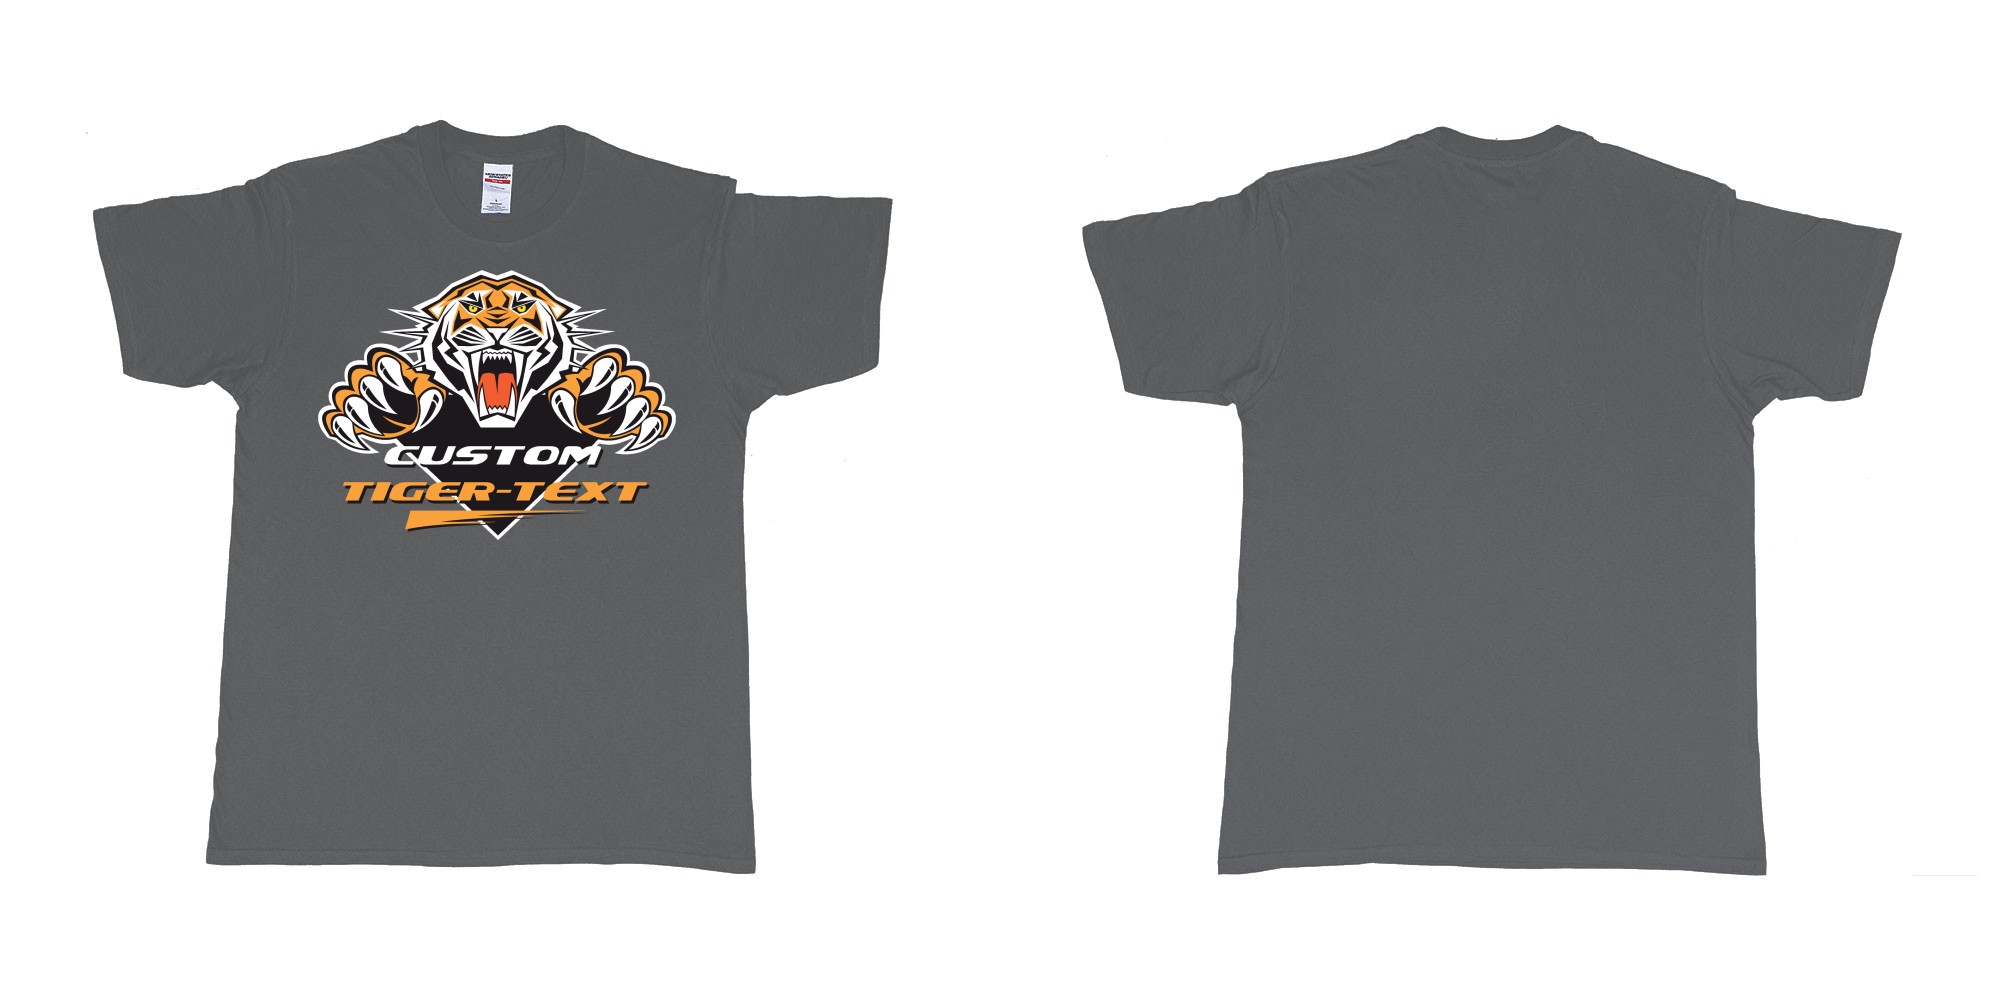 Custom tshirt design the wests tigers sydney national rugby league custom tshirt print in fabric color charcoal choice your own text made in Bali by The Pirate Way